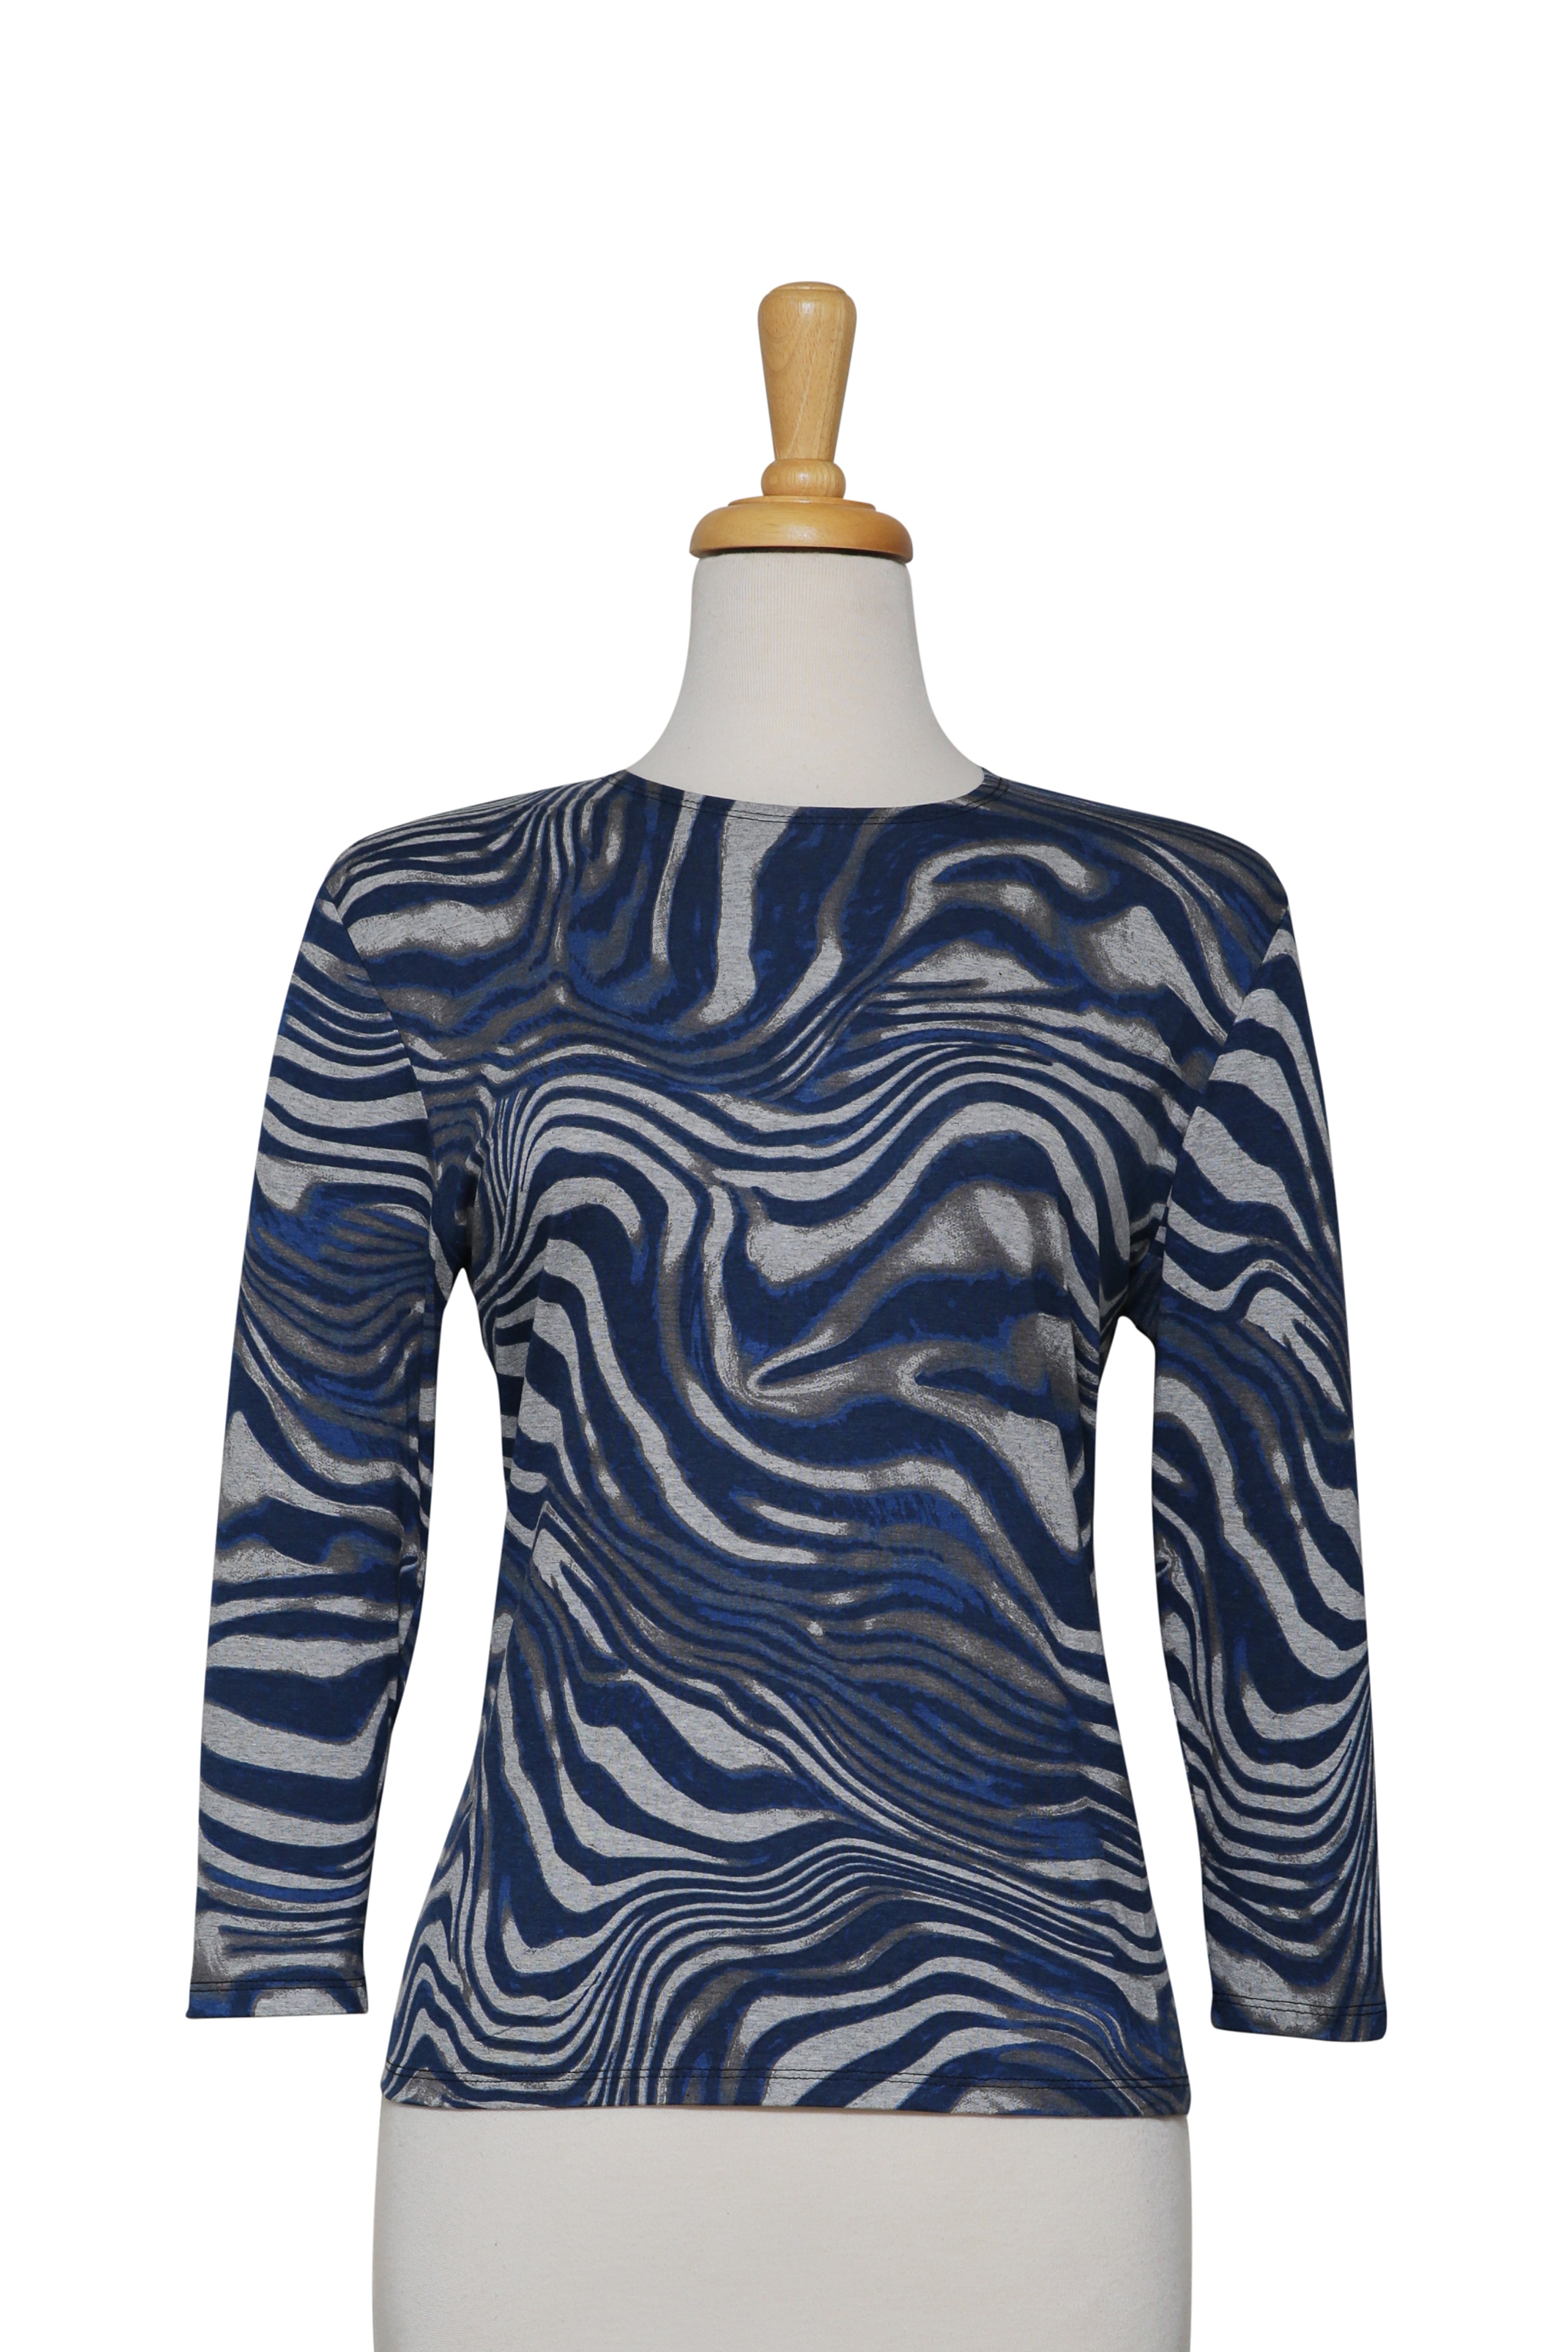 Shades of Blue and Grey Swirls Cotton 3/4 Sleeve Top 